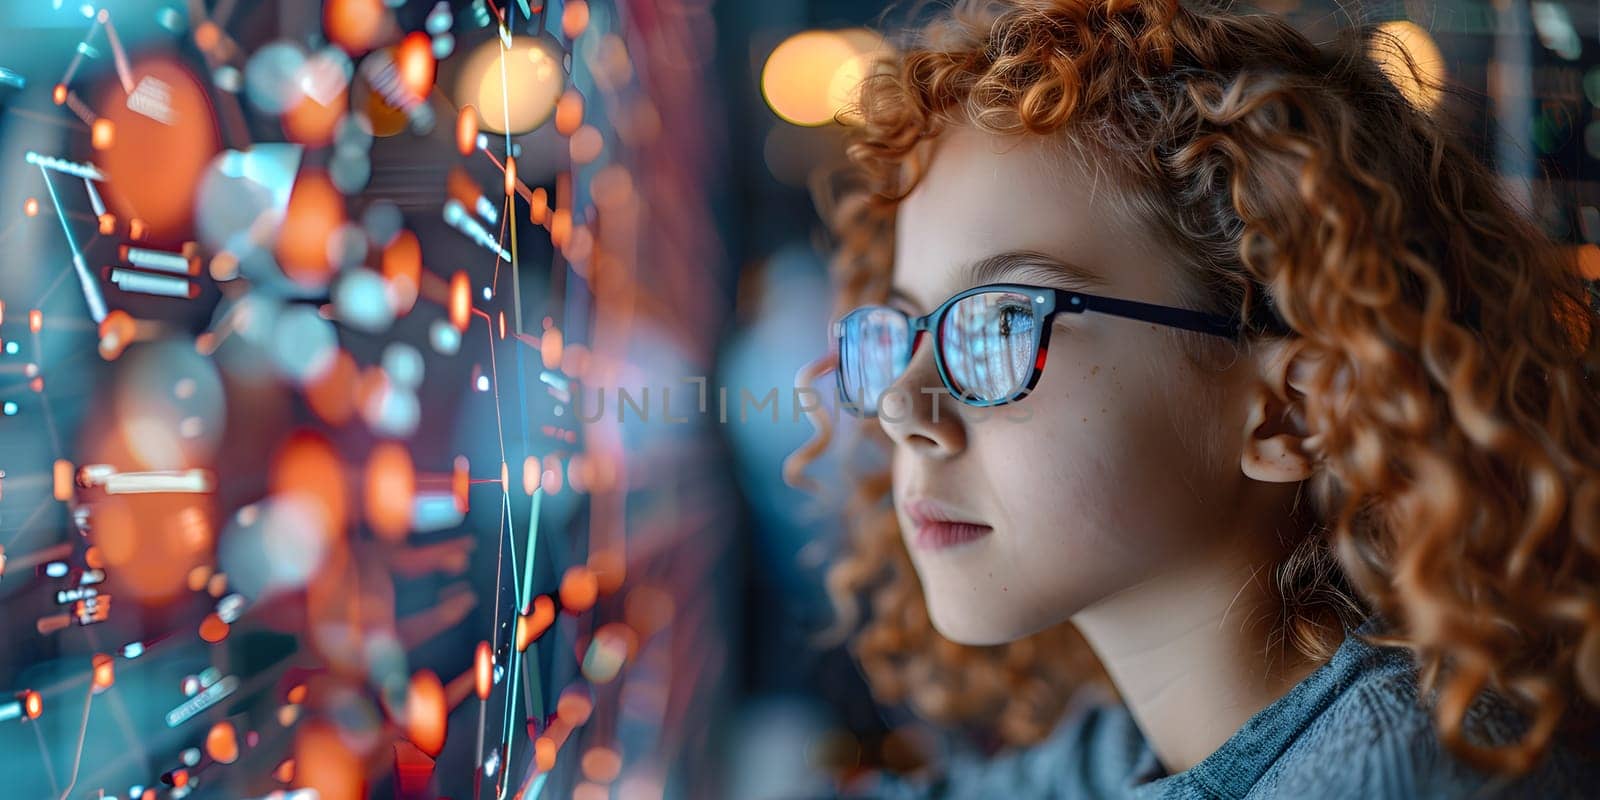 A young girl with black hair and ringlet hairstyle is happily looking at a computer screen while wearing glasses to take care of her vision. Her eyelashes and eyewear reflect the flash photography